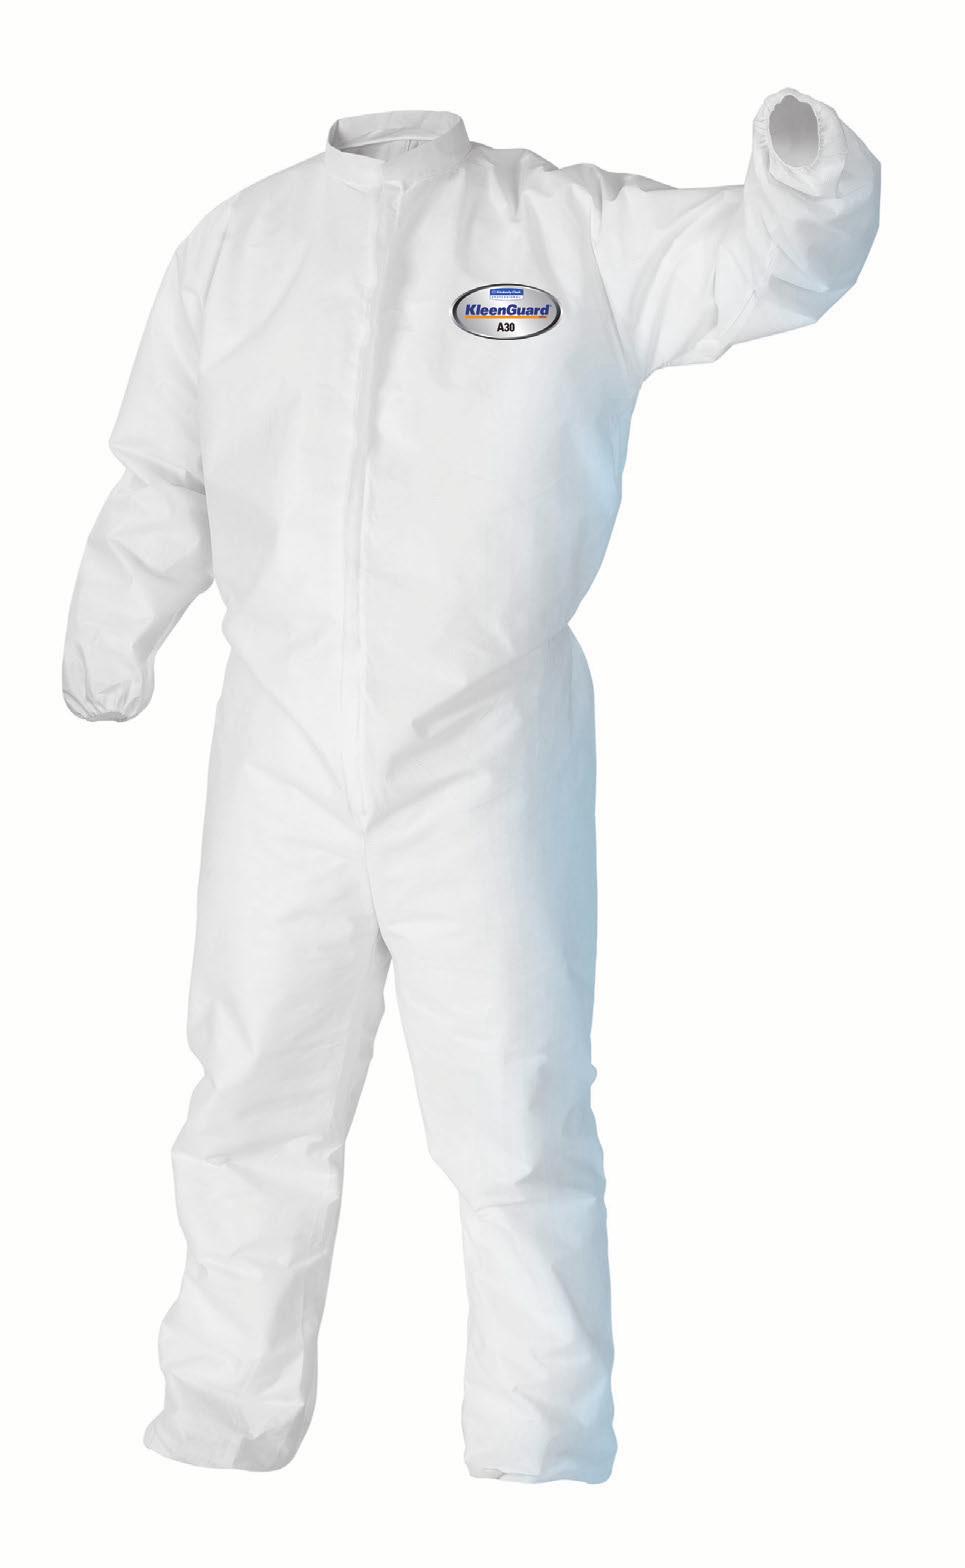 A Breathable plash & Particle Protection Apparel KEENGUARD* A Coveralls Zipper Front with 1" Flap & Elastic Back Typical Uses 46002 Pharmaceutical 46003 research Dry particle 46004 X contamination